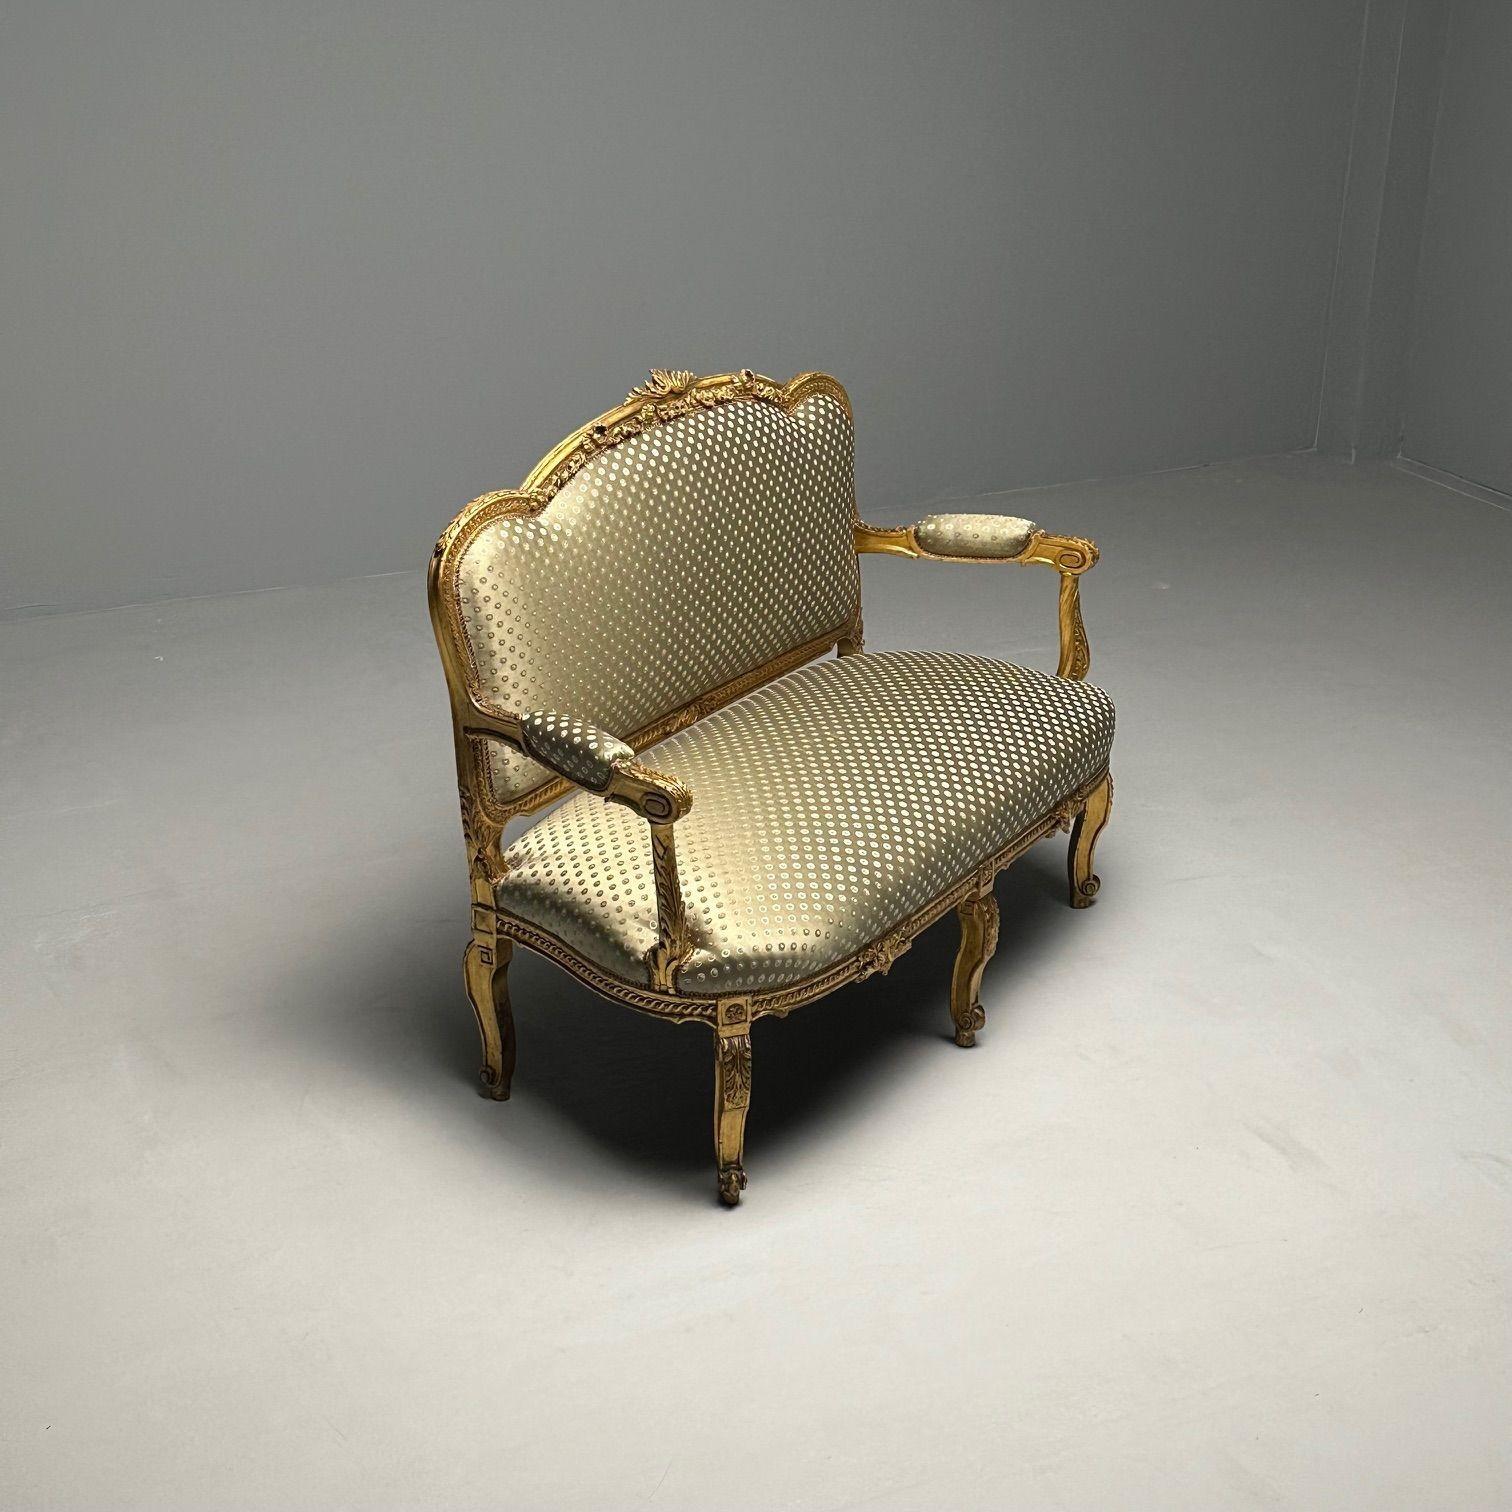 19th Century Settee / Canape, Durand, Louis XV, Giltwood, Scalamandre Upholstery In Good Condition For Sale In Stamford, CT